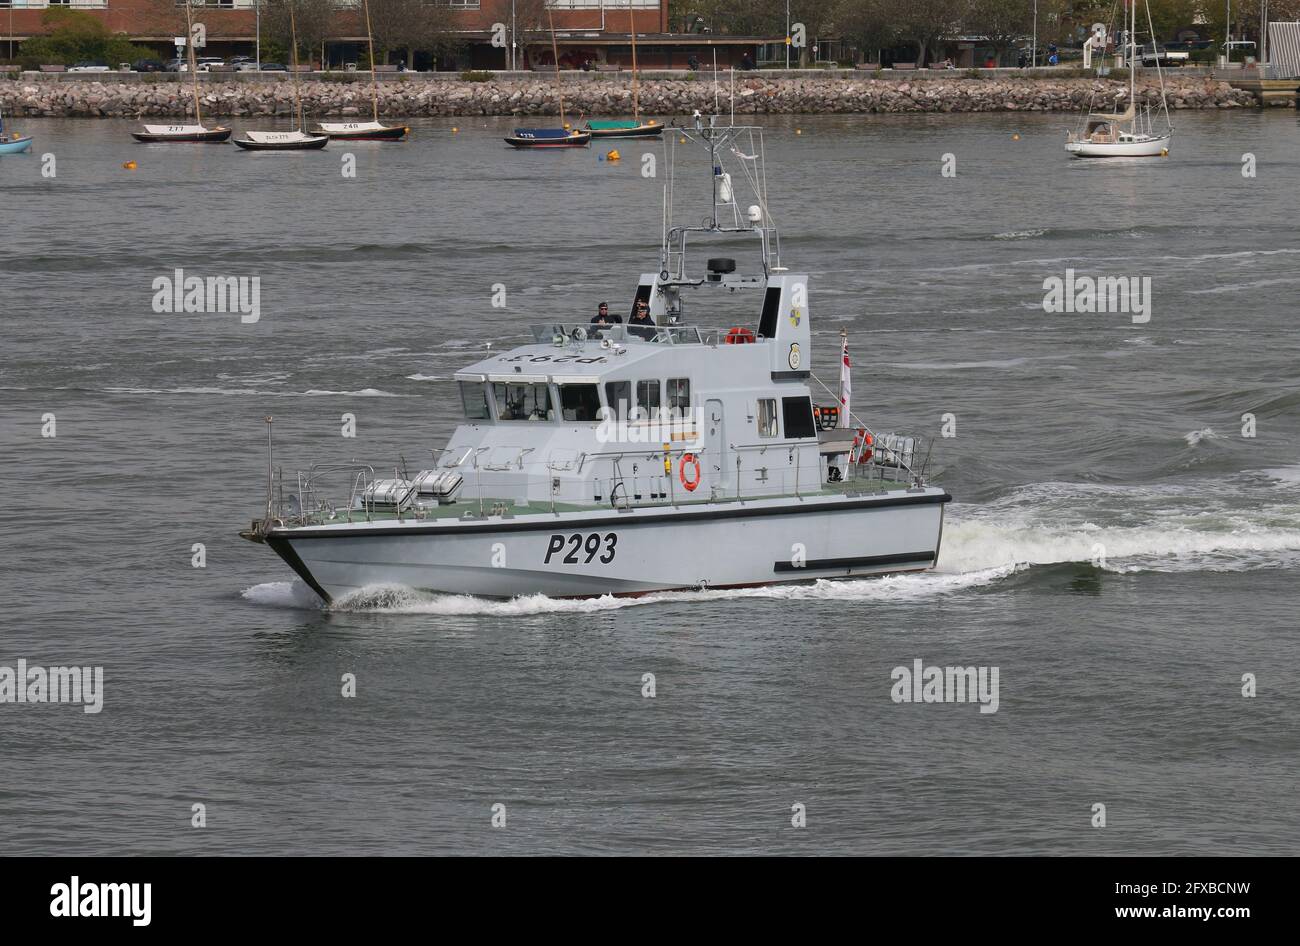 The Royal Navy Archer class fast training boat HMS RANGER (P293) leaving harbour Stock Photo